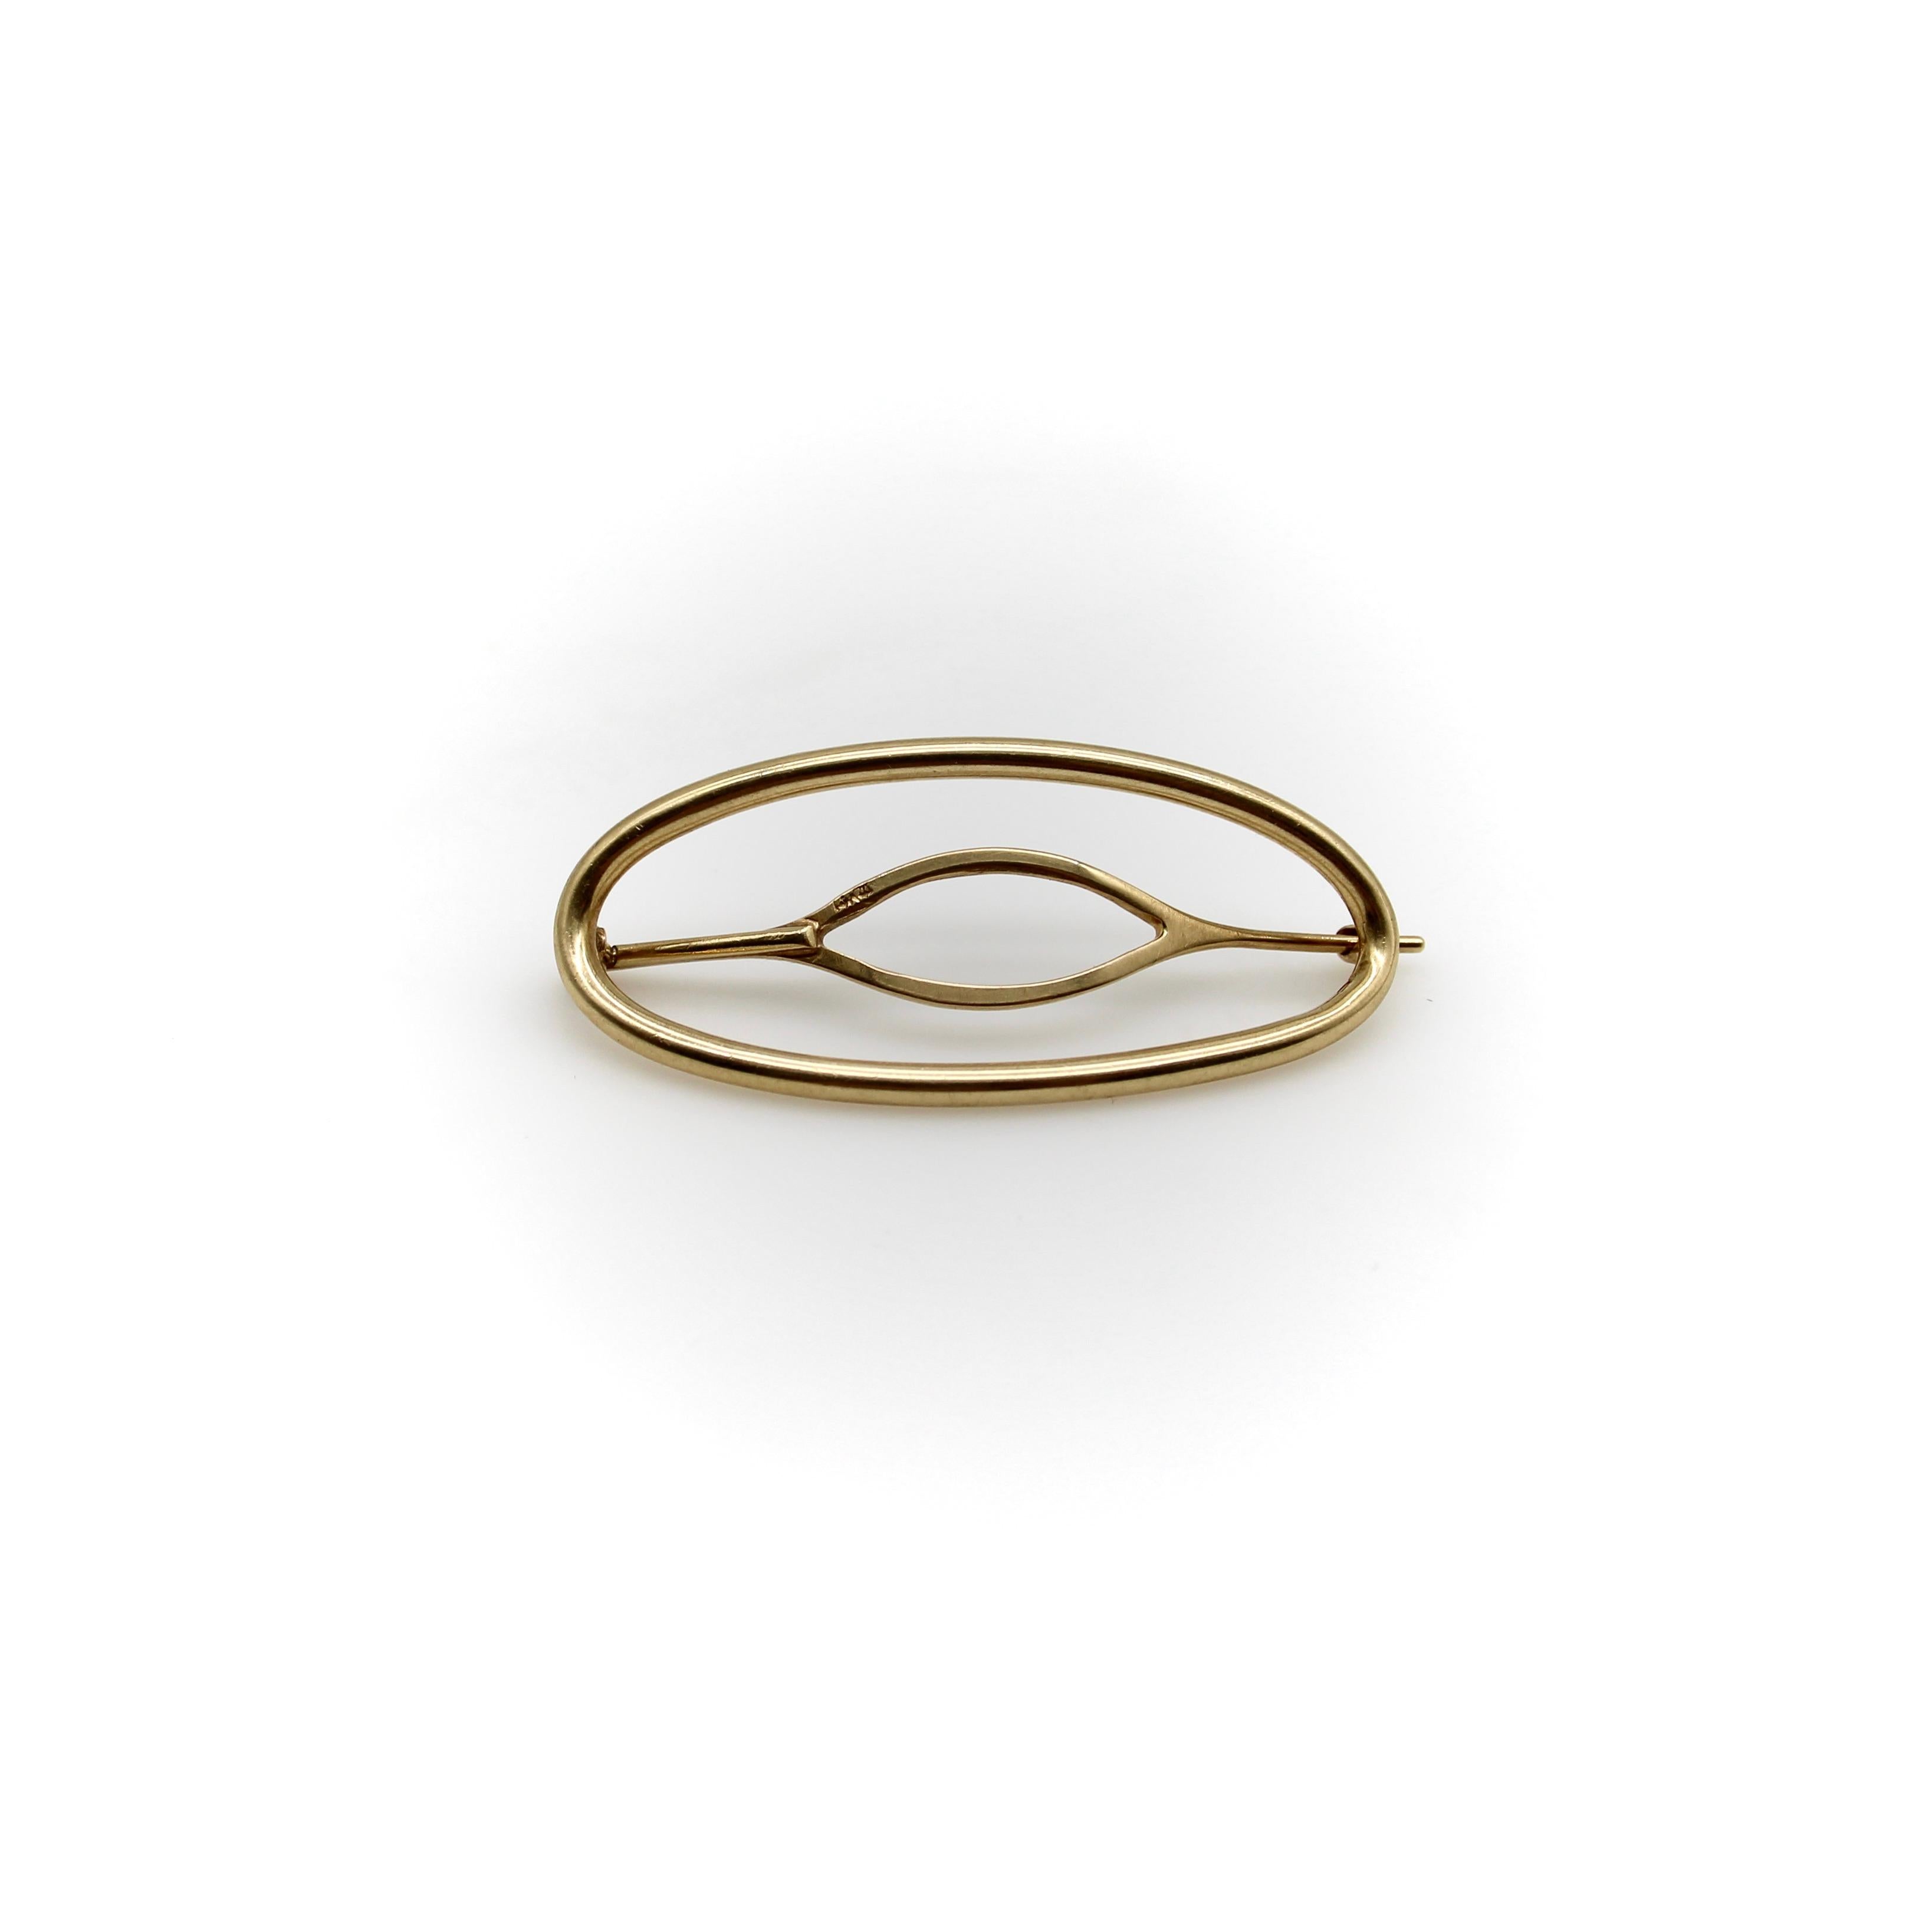 Perfect for a wedding or special occasion, what could be more opulent than wearing a beautiful gold adornment in your hair? This elongated oval design is simple and clean, and the 14k gold makes a perfect compliment to any hair color. The barrette